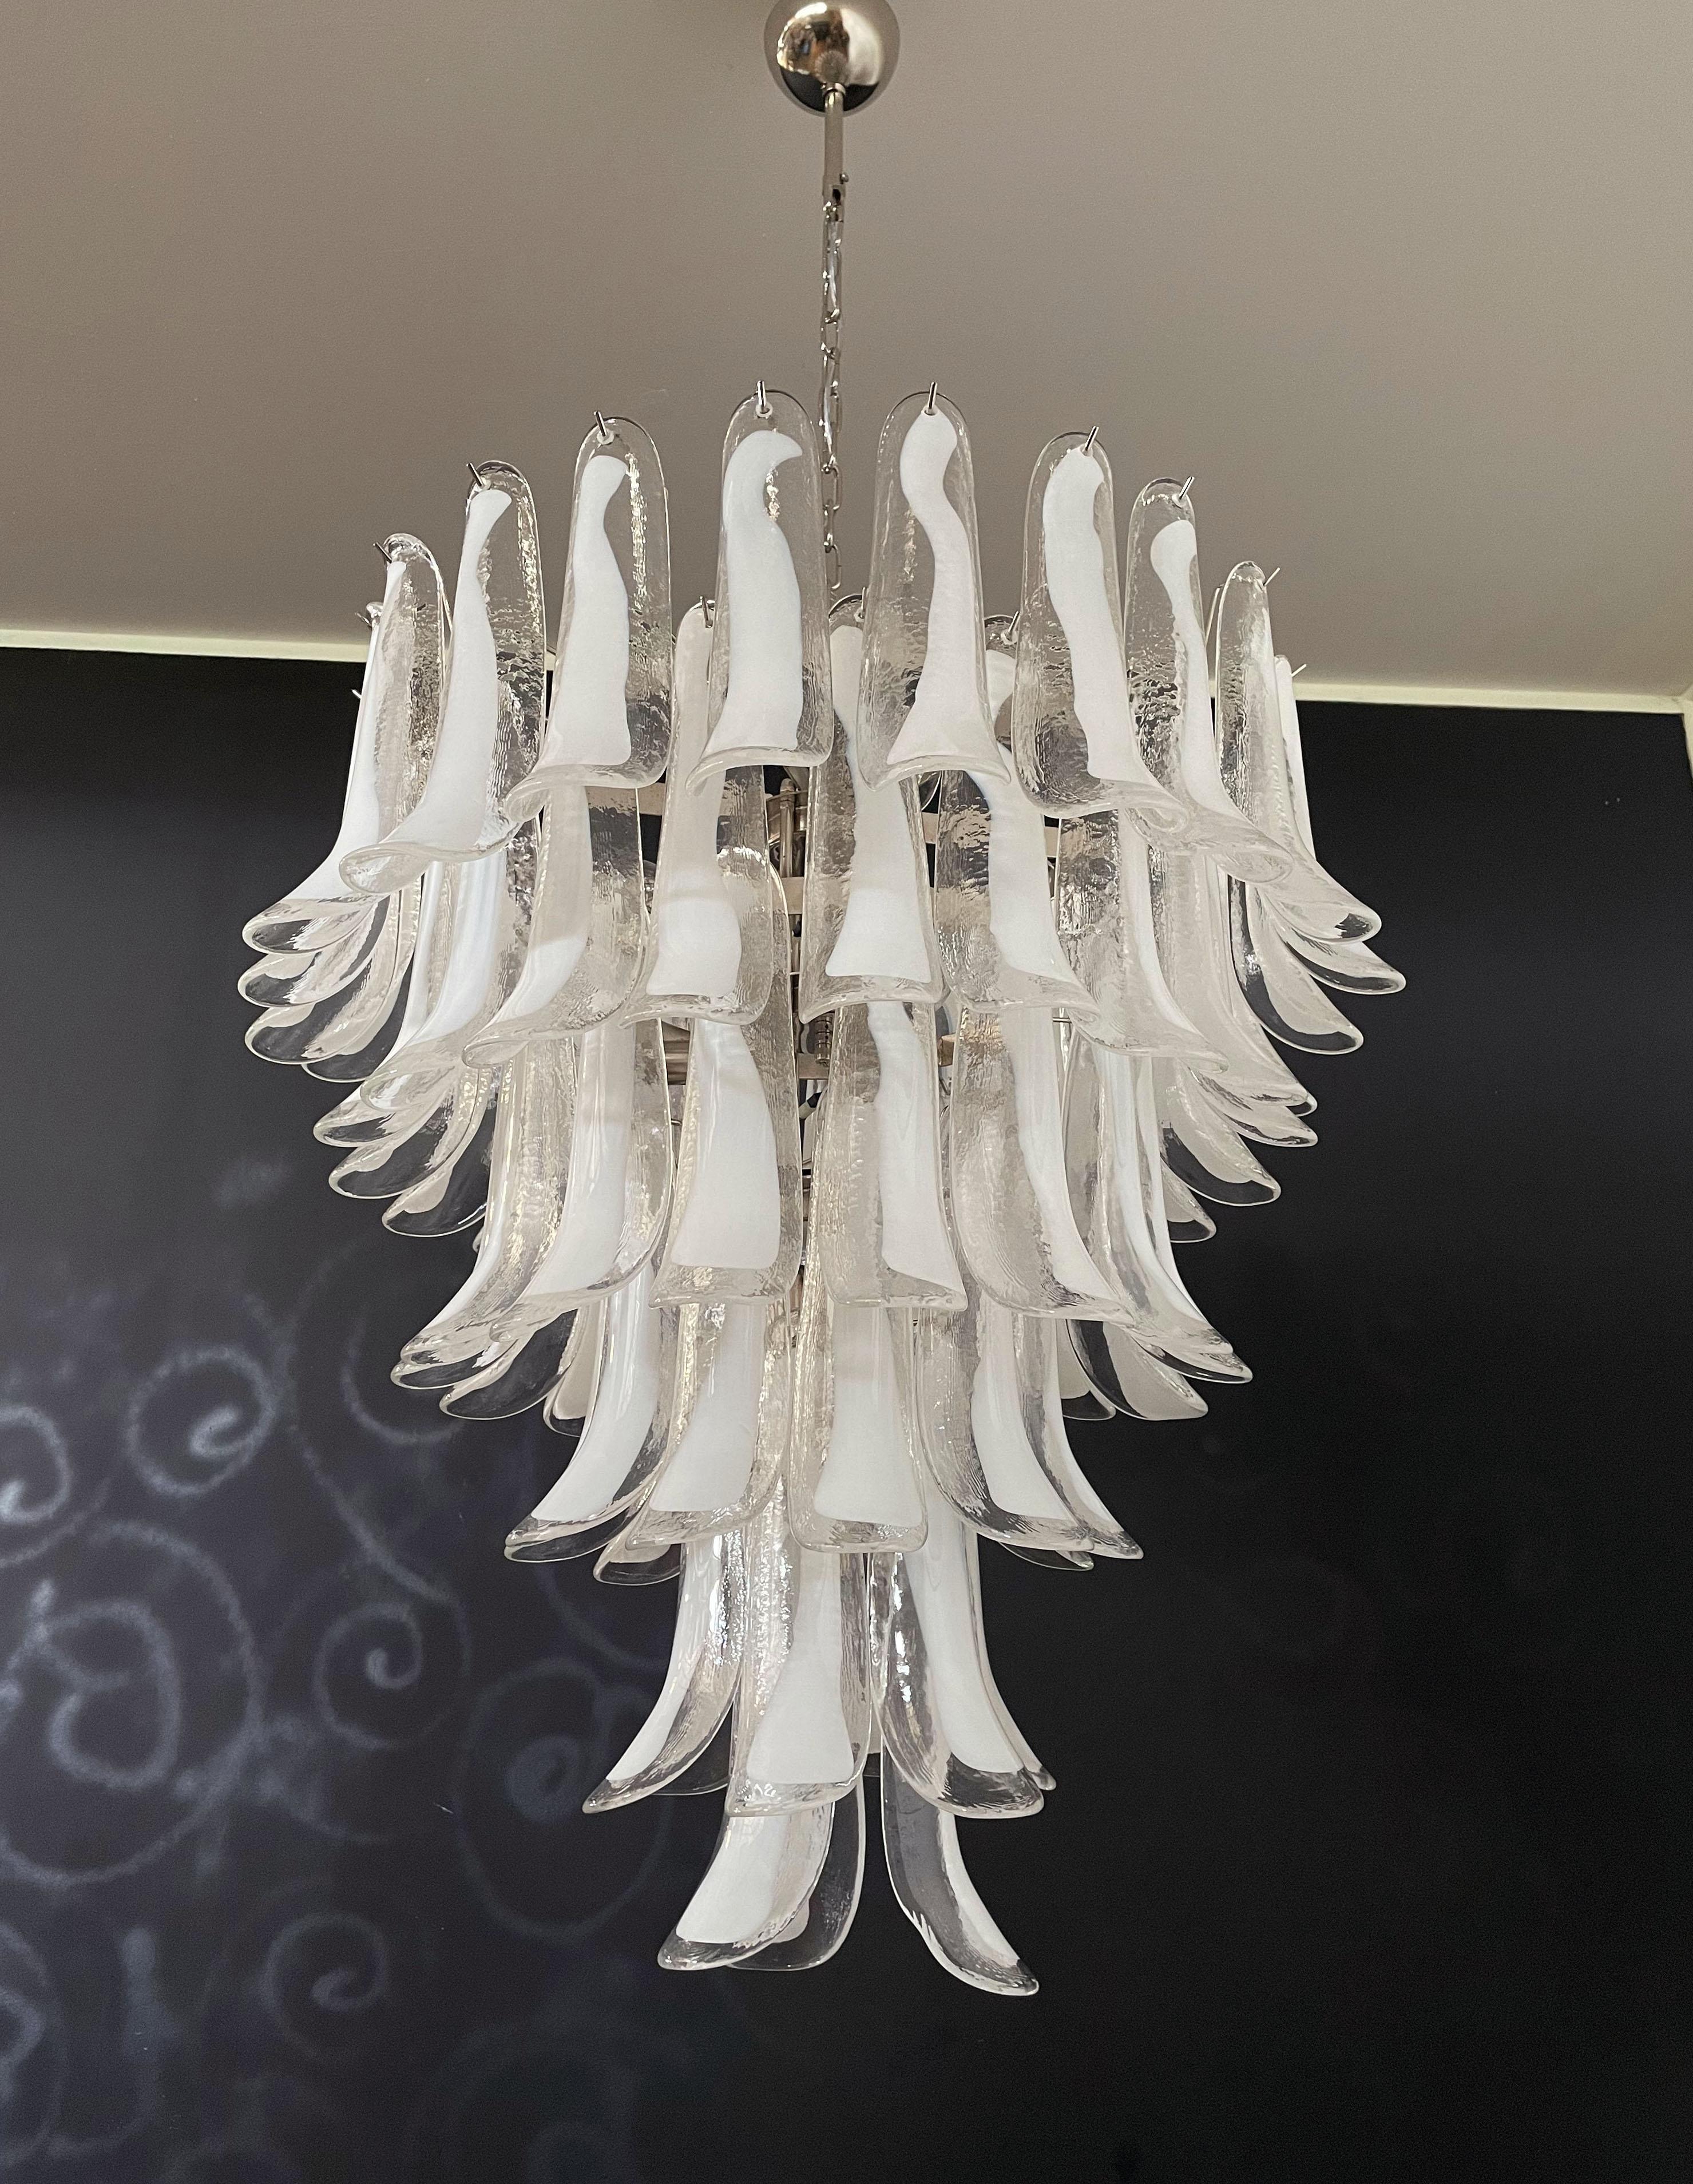 Huge Italian vintage Murano chandelier made by 75 glass petals (transparent and white “lattimo”) in a chrome frame.
Period: late XX century
Dimensions: 65 inches (165 cm) height with chain; 37,40 inches (95 cm) height without chain; 31,50 inches (80